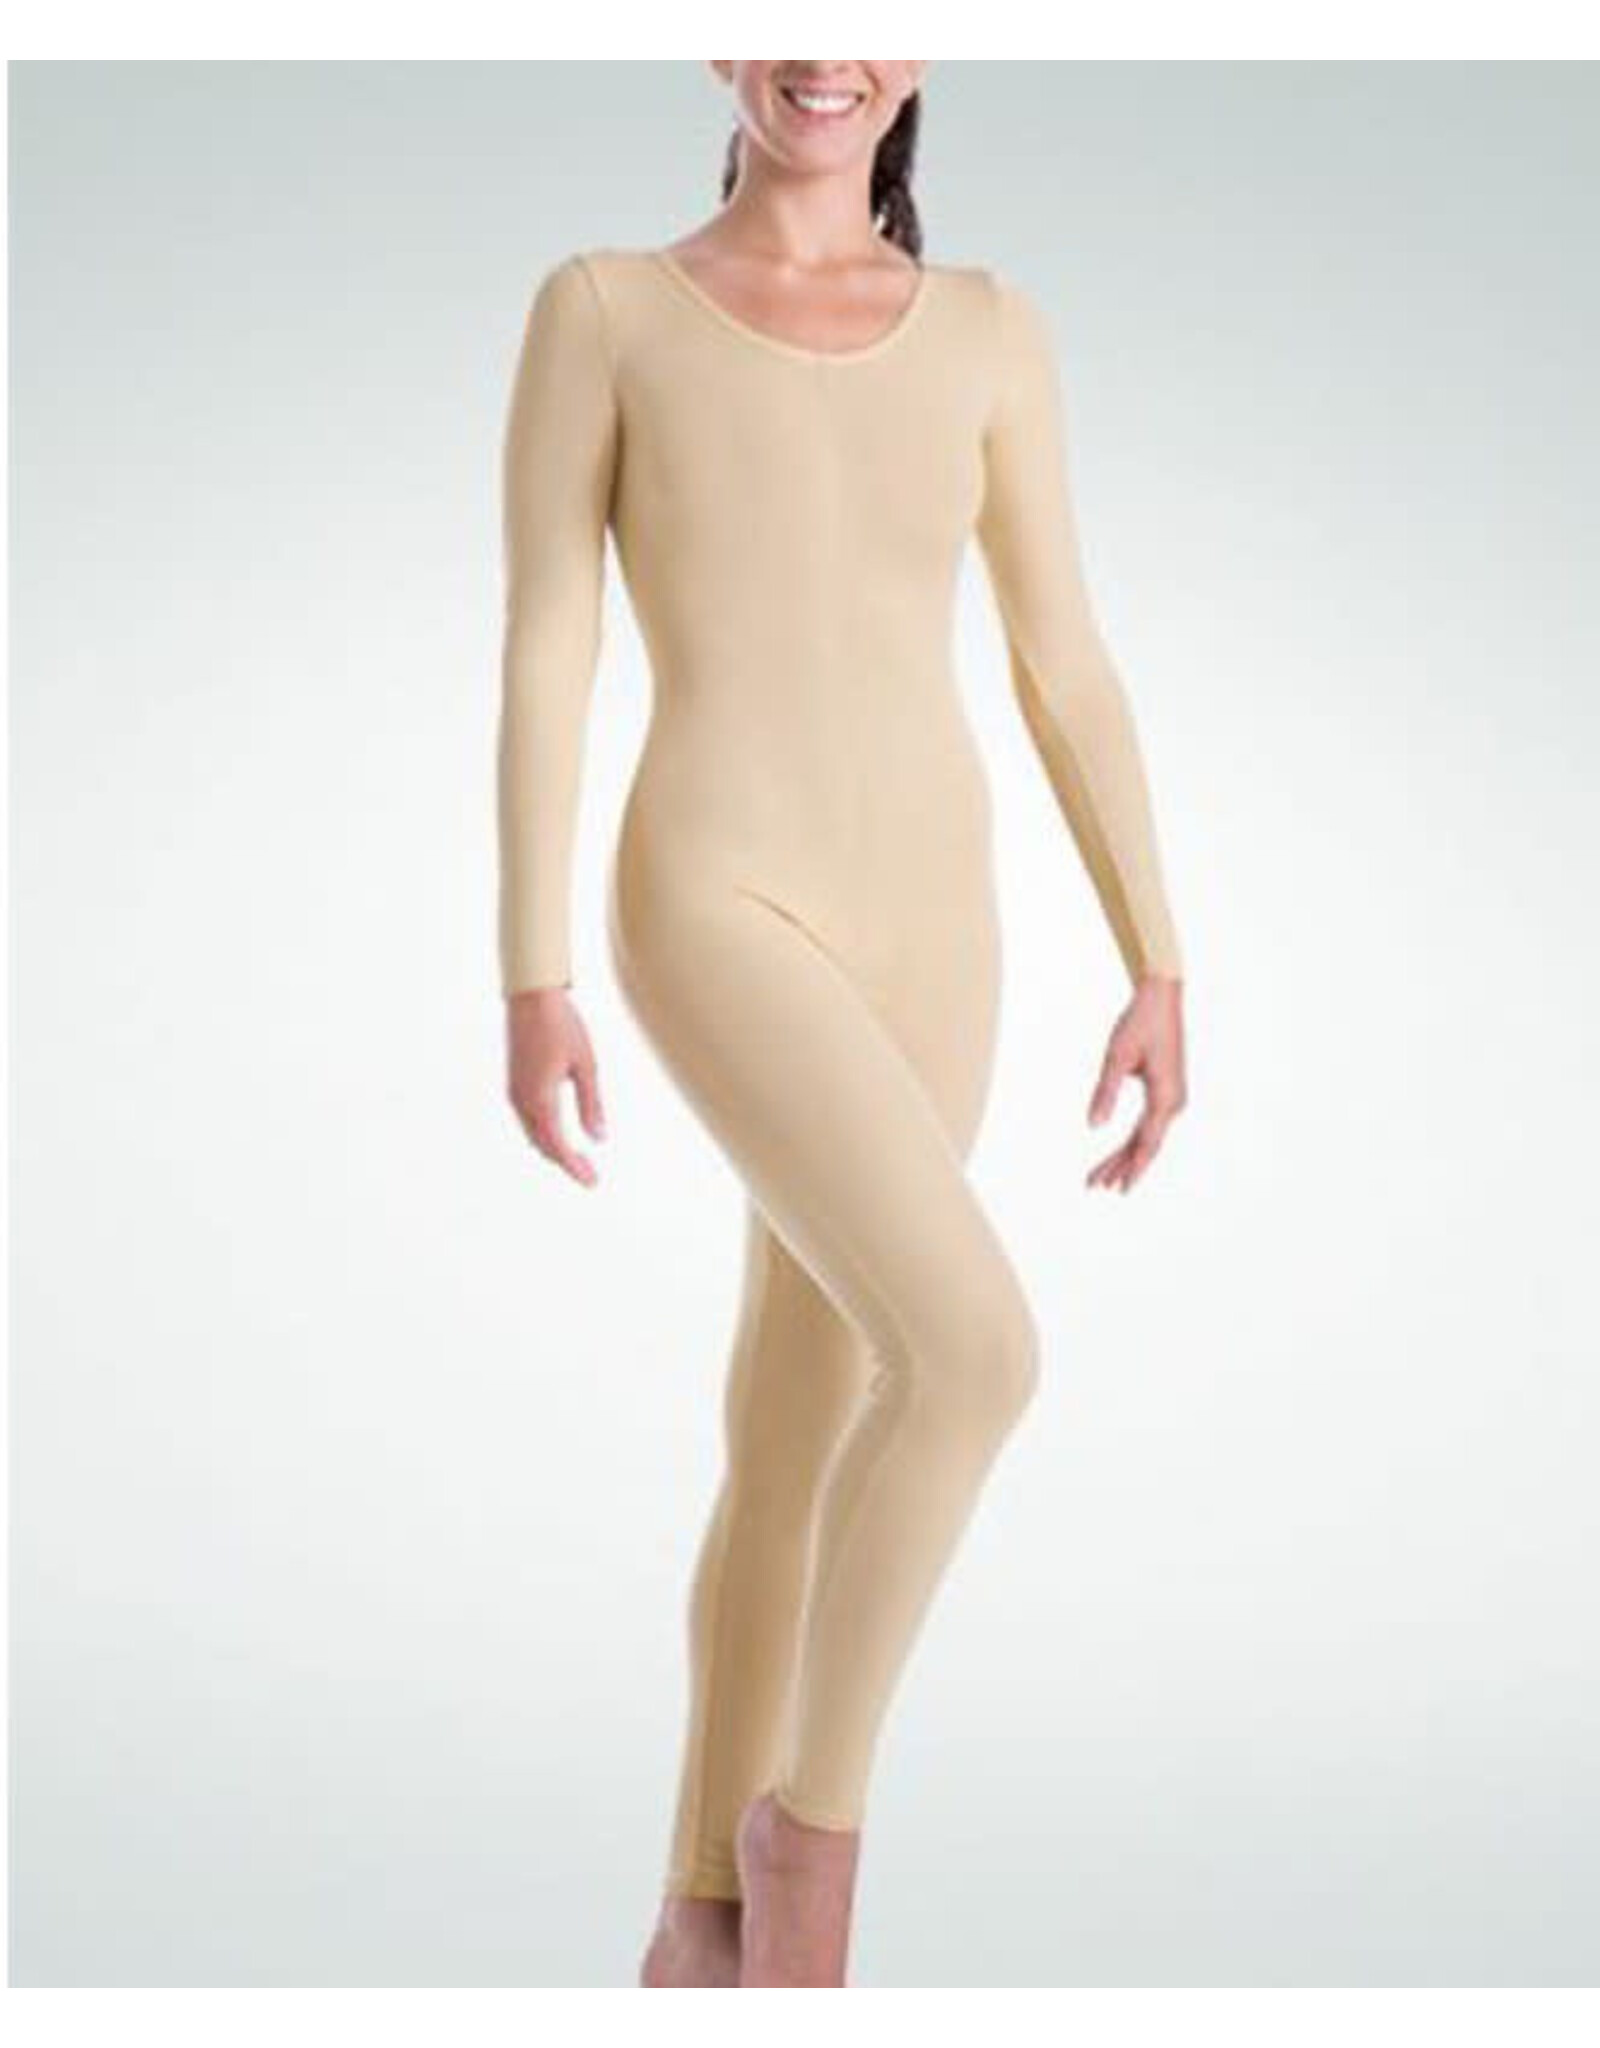 Body Wrappers Adult Long Sleeve Unitard (MT217)